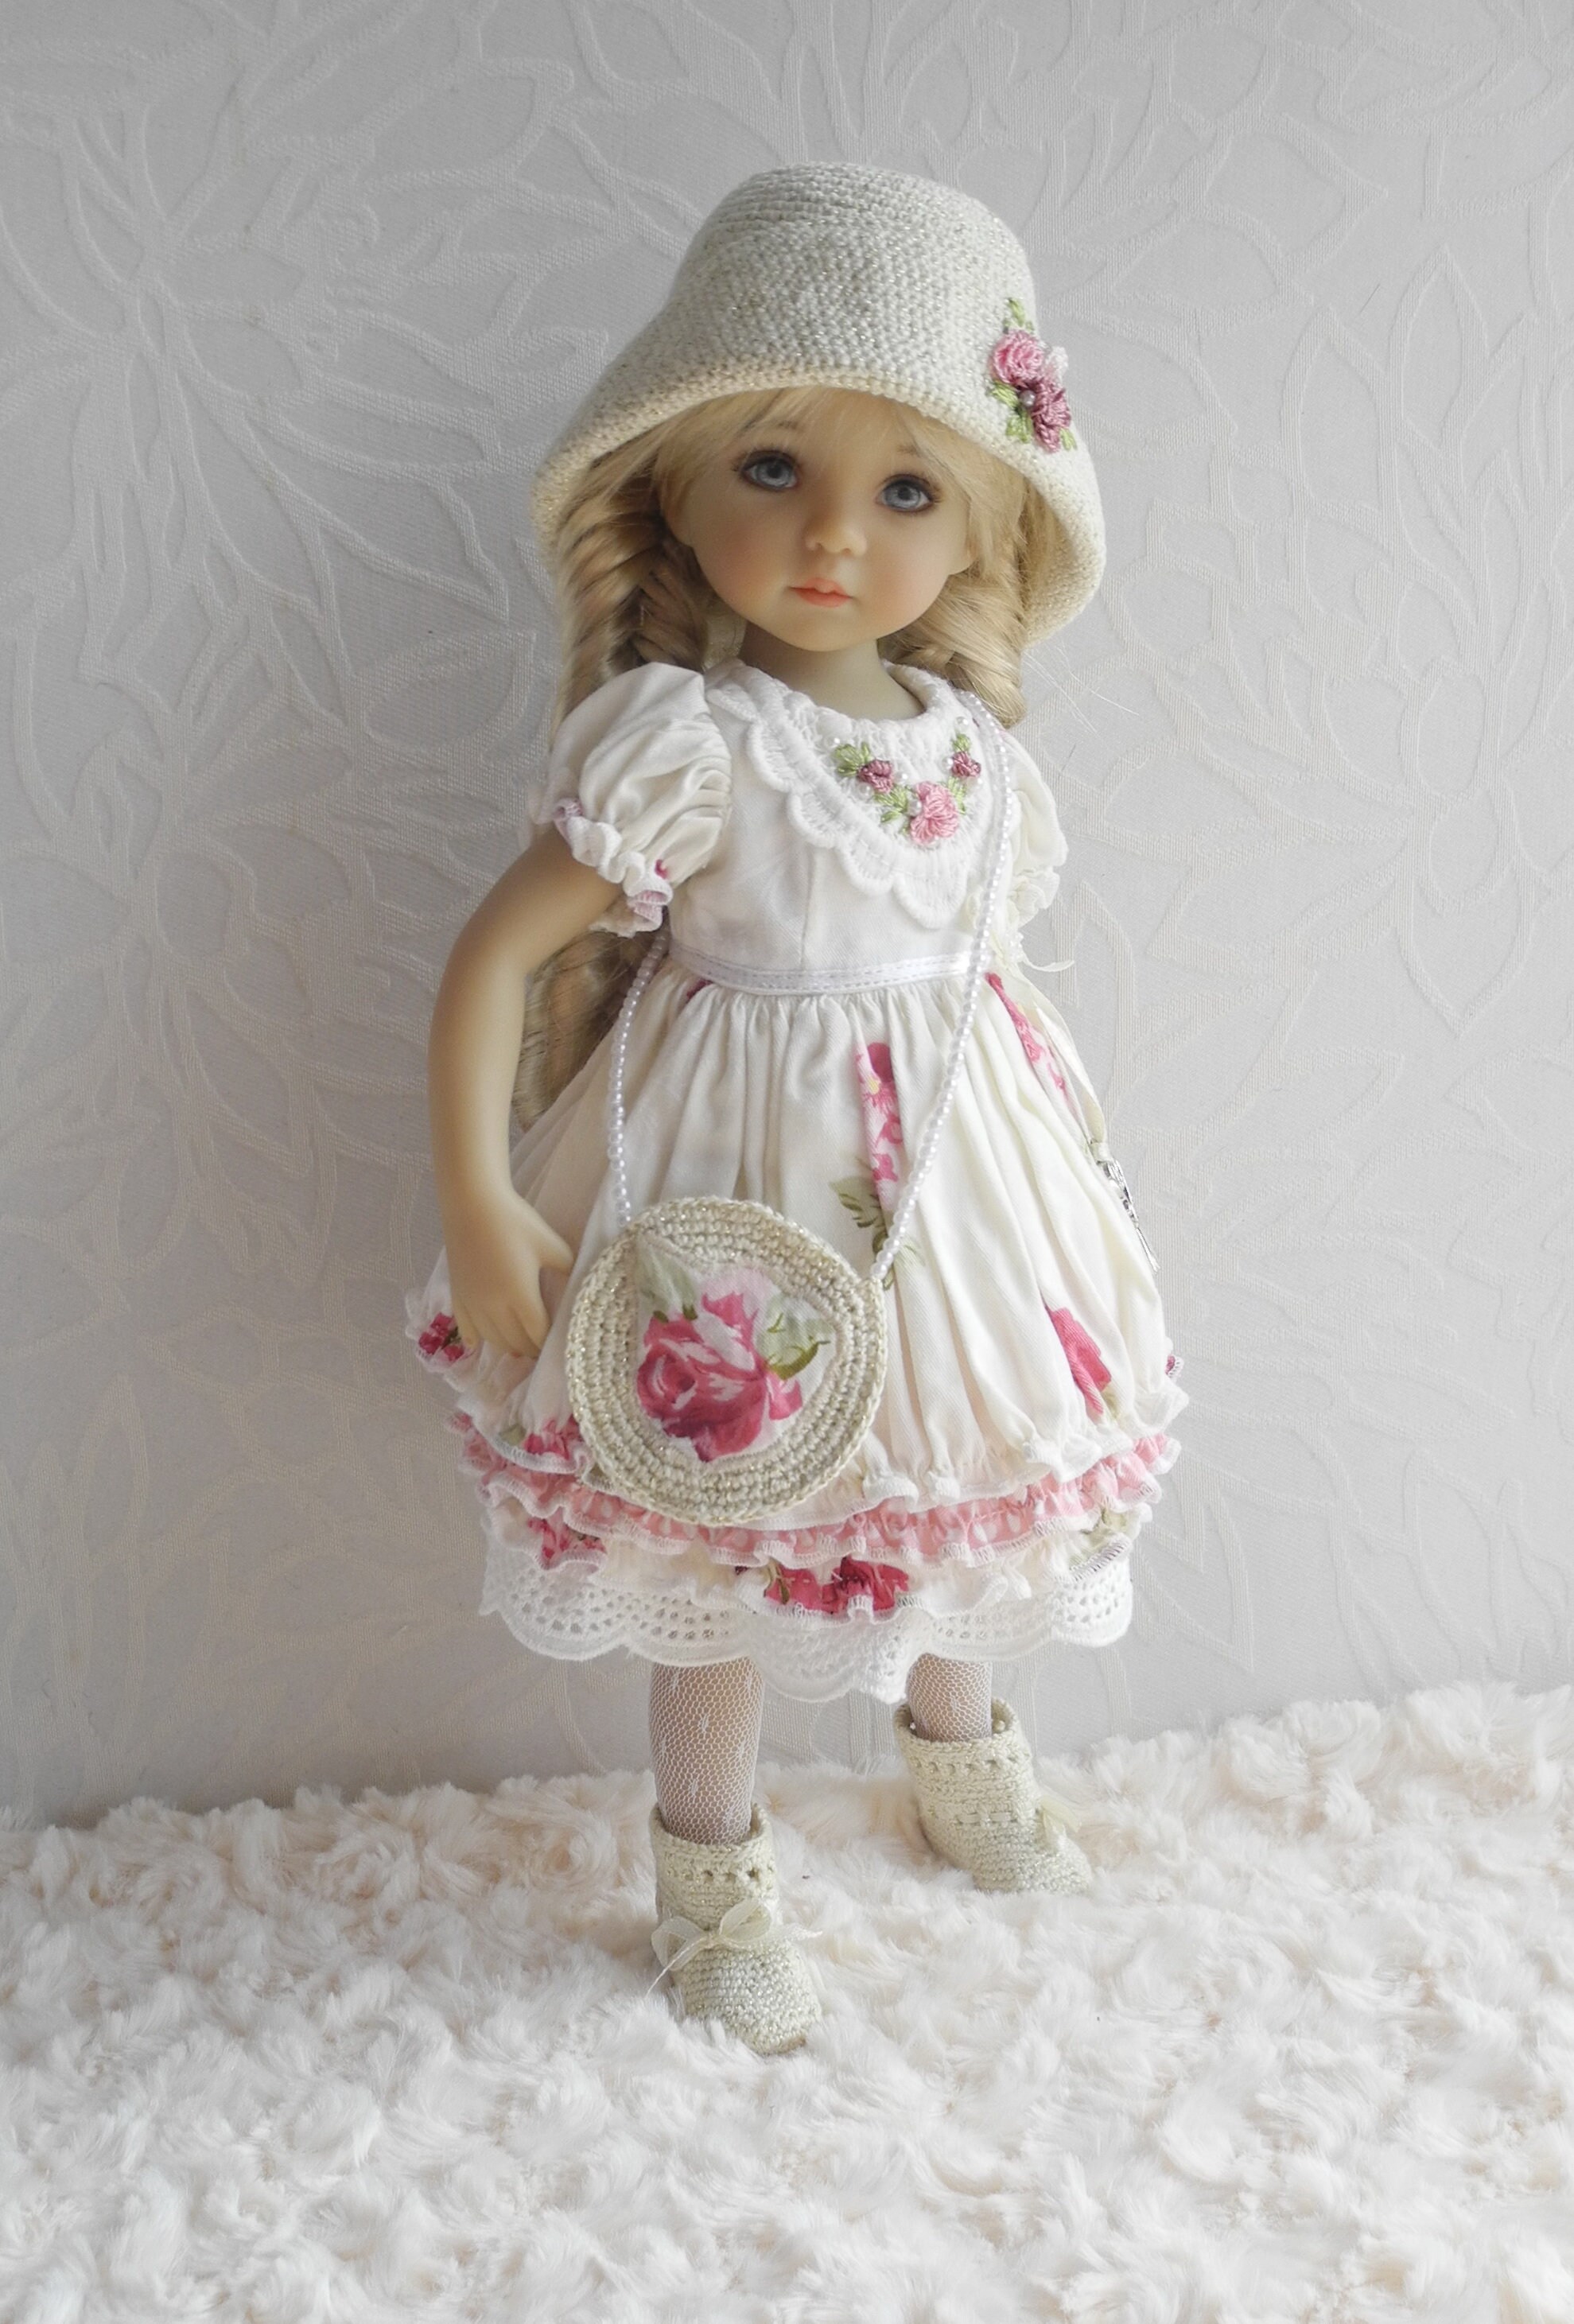 Little Darling Dianna Effner doll clothes dress with lace | Etsy